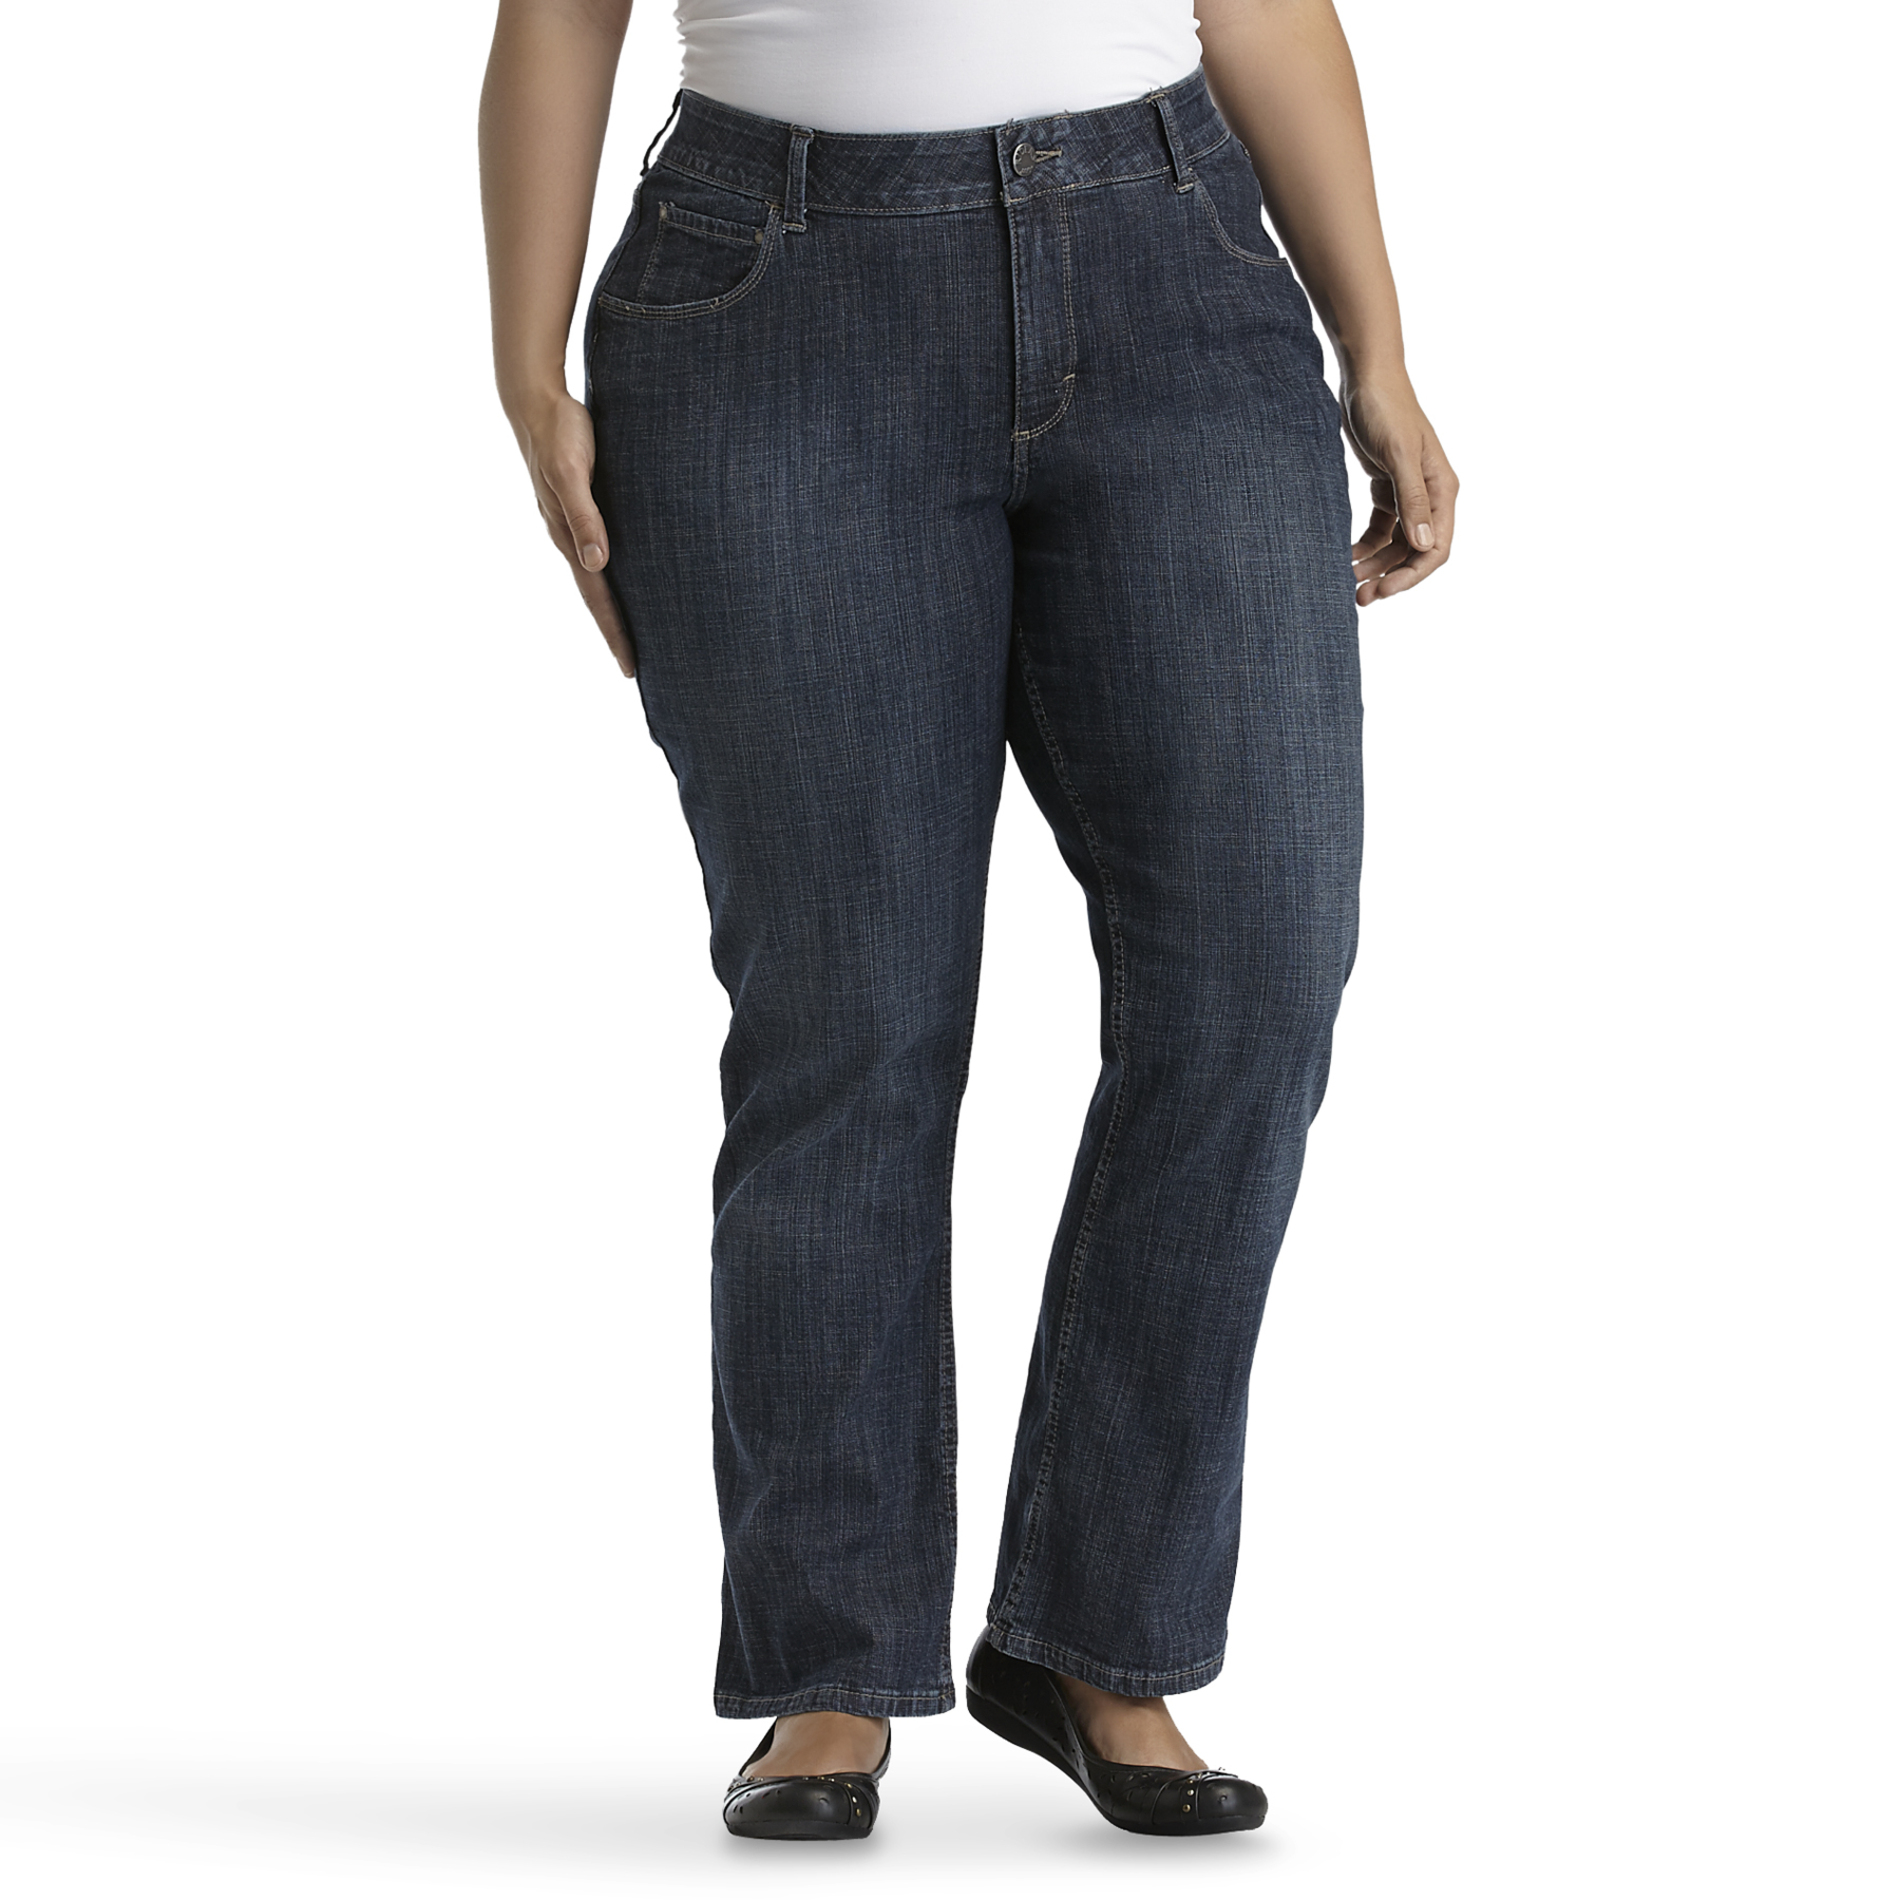 Women's Plus Size Bootcut Jeans: Find Great Prices, Comfort at Kmart